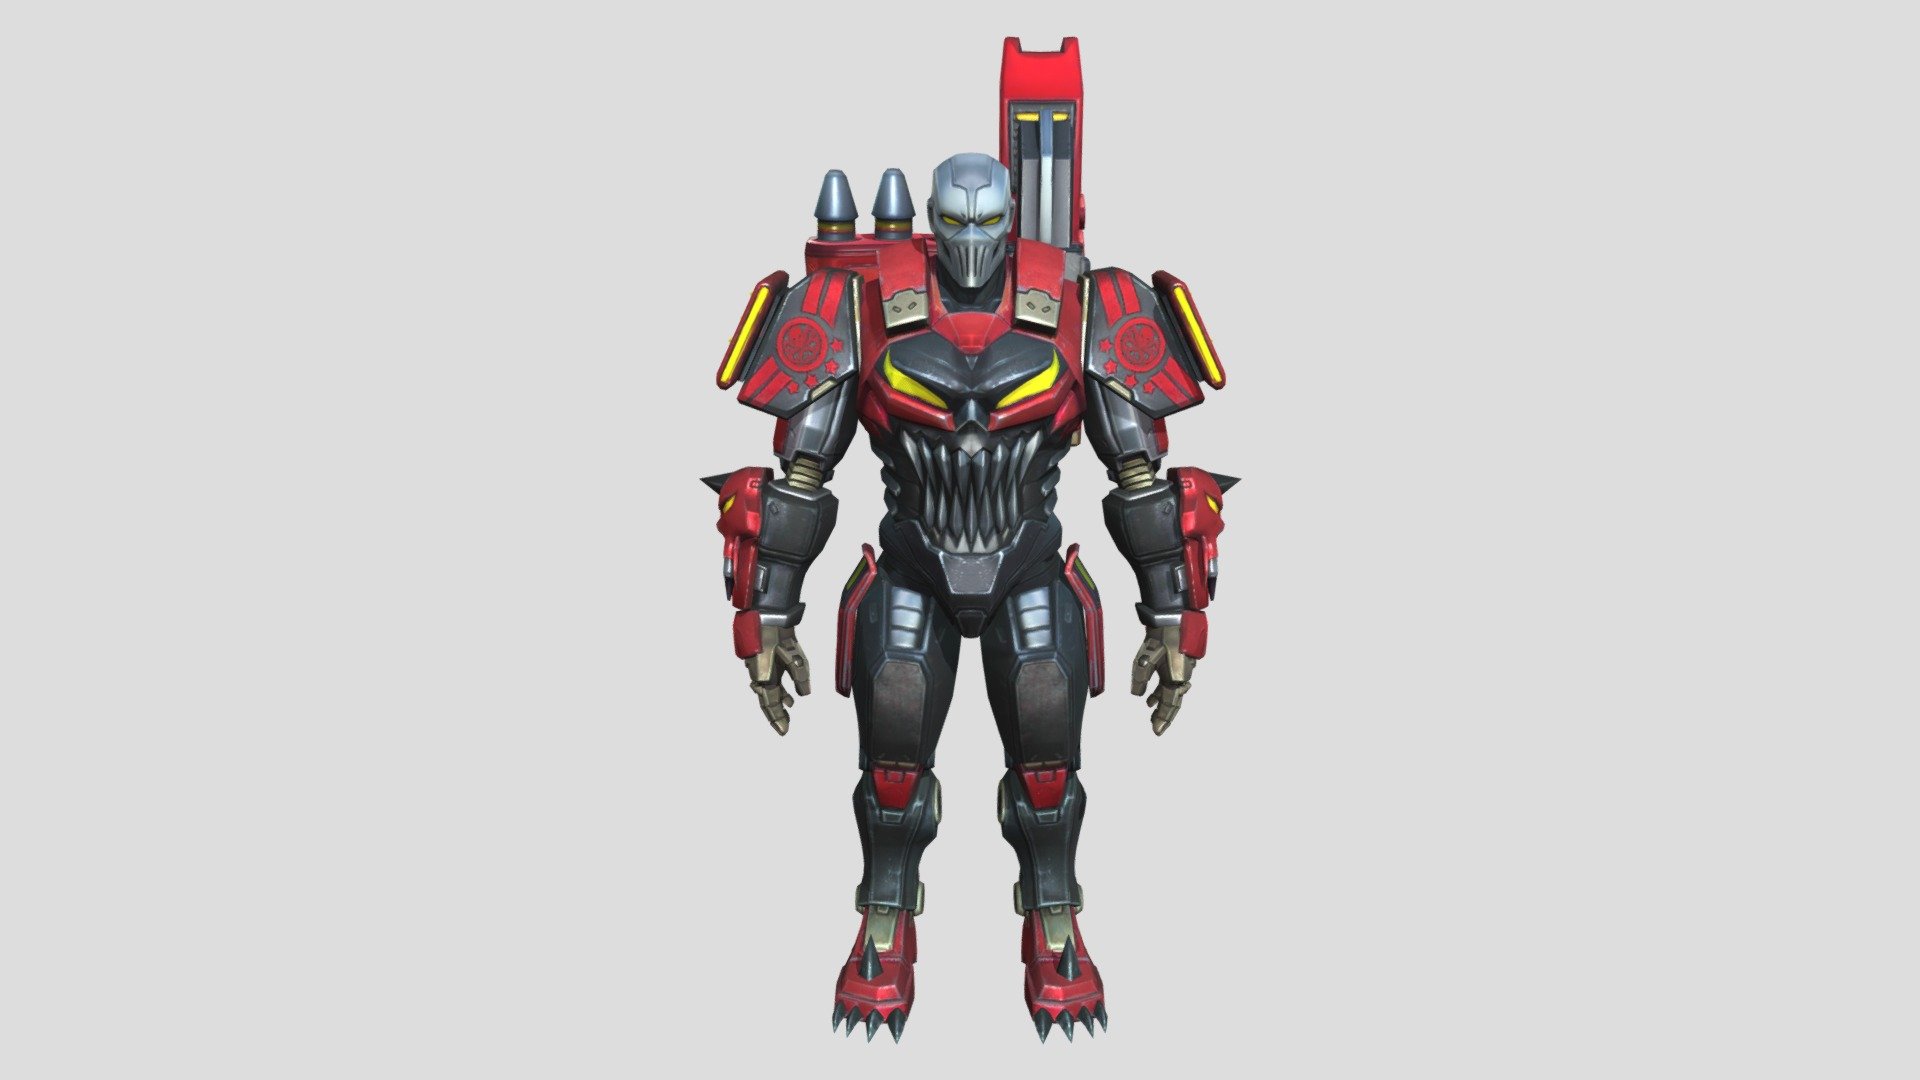 YouTube Link : https://youtube.com/@BELORSE

This Is Warbringer Version Of War Machine, This Model Is Well Textured Or Rigged, You Can Download It And Can Use On Your Animations. 

File Format : 
•FBX
•PNG - War Machine Warbringer(Textured) (Rigged) - Download Free 3D model by CAPTAAINR 3d model